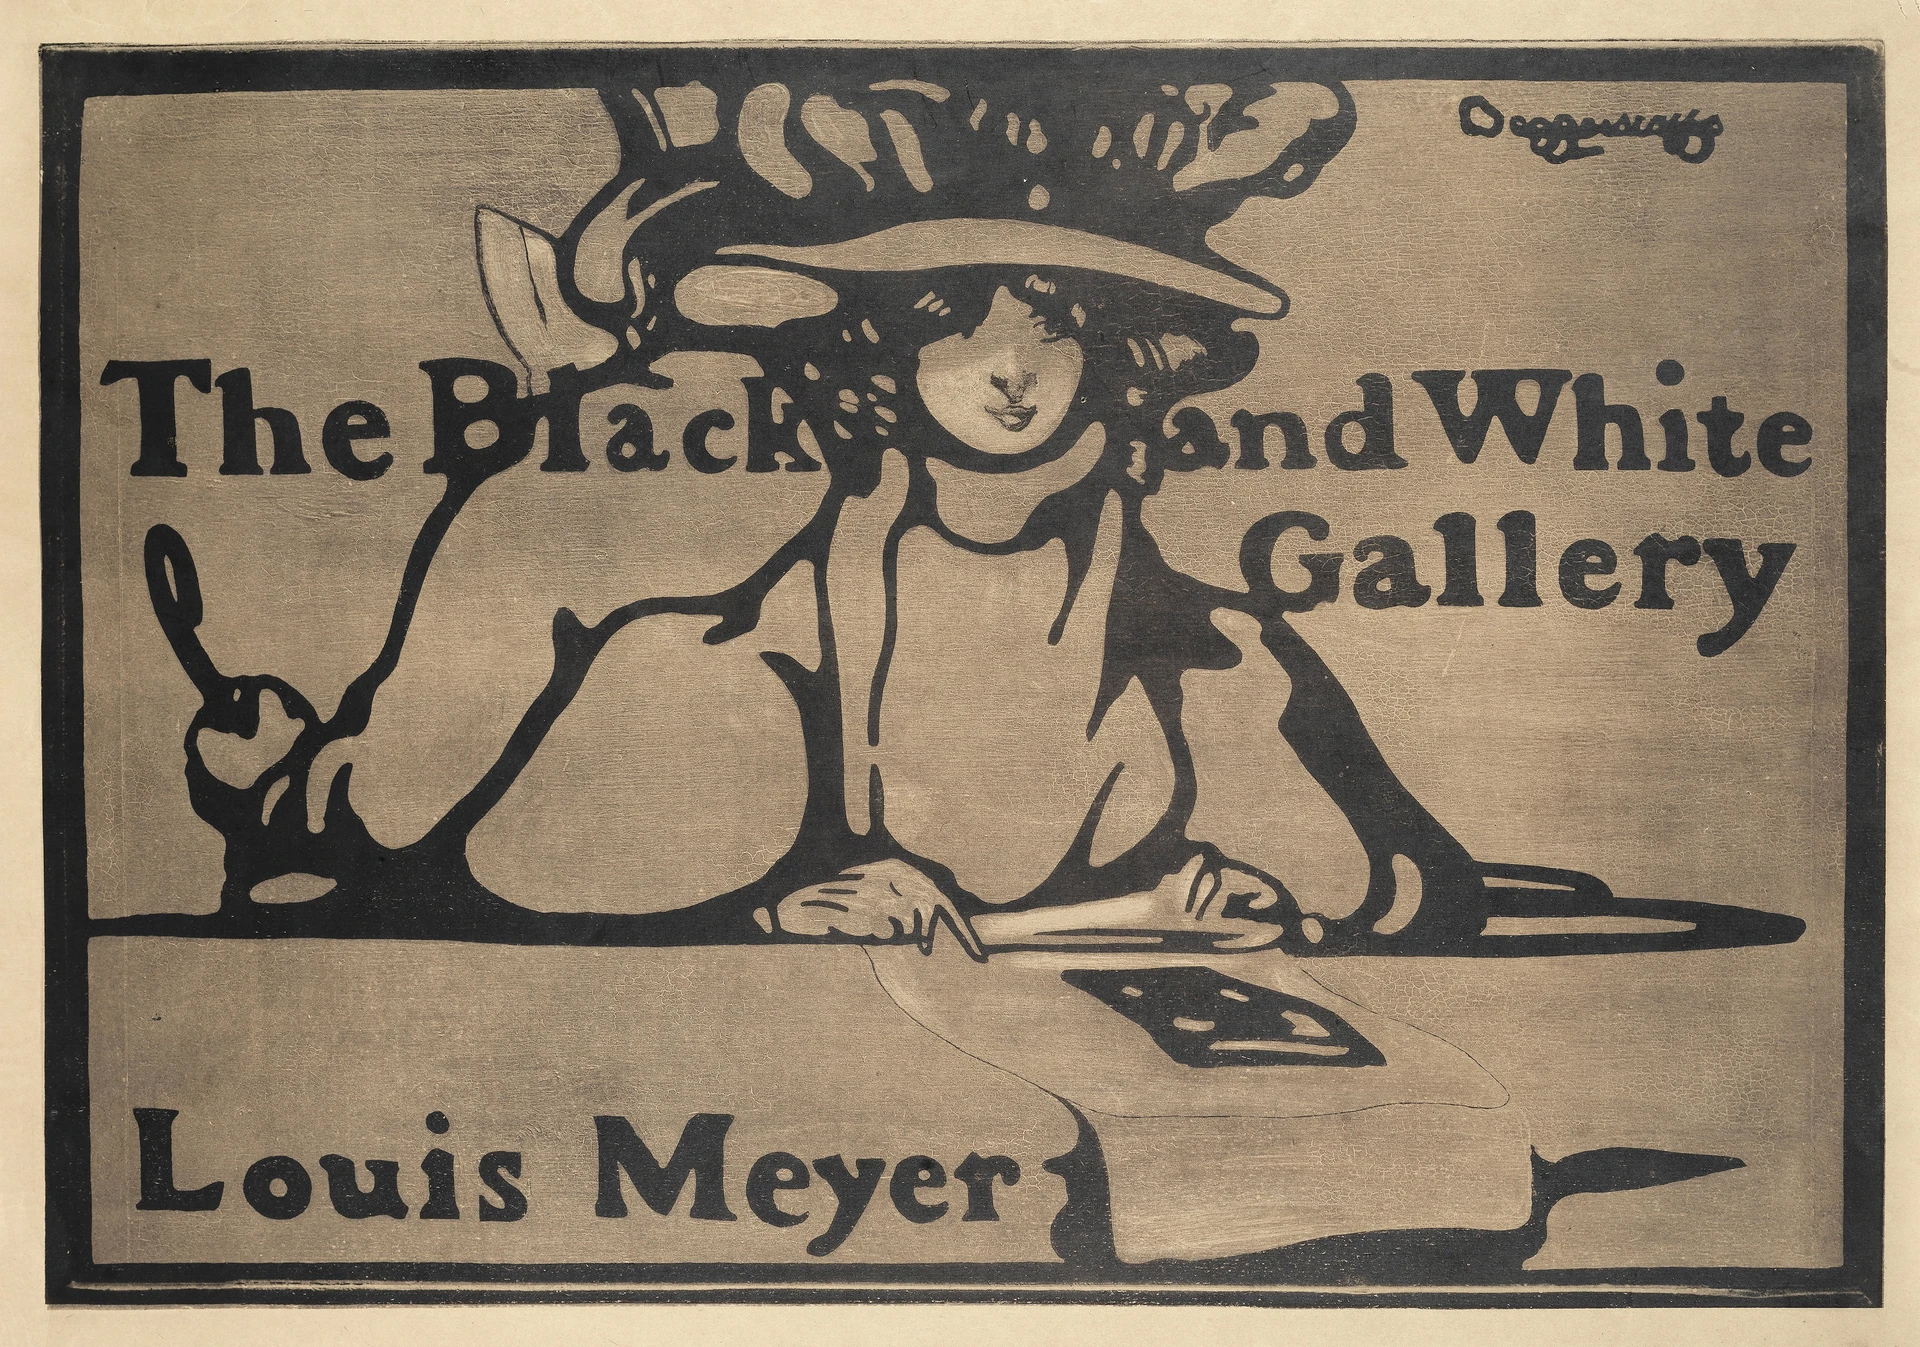 Black and White Gallery, Louis Meyer poster by the Beggarstaff Brothers, c1899